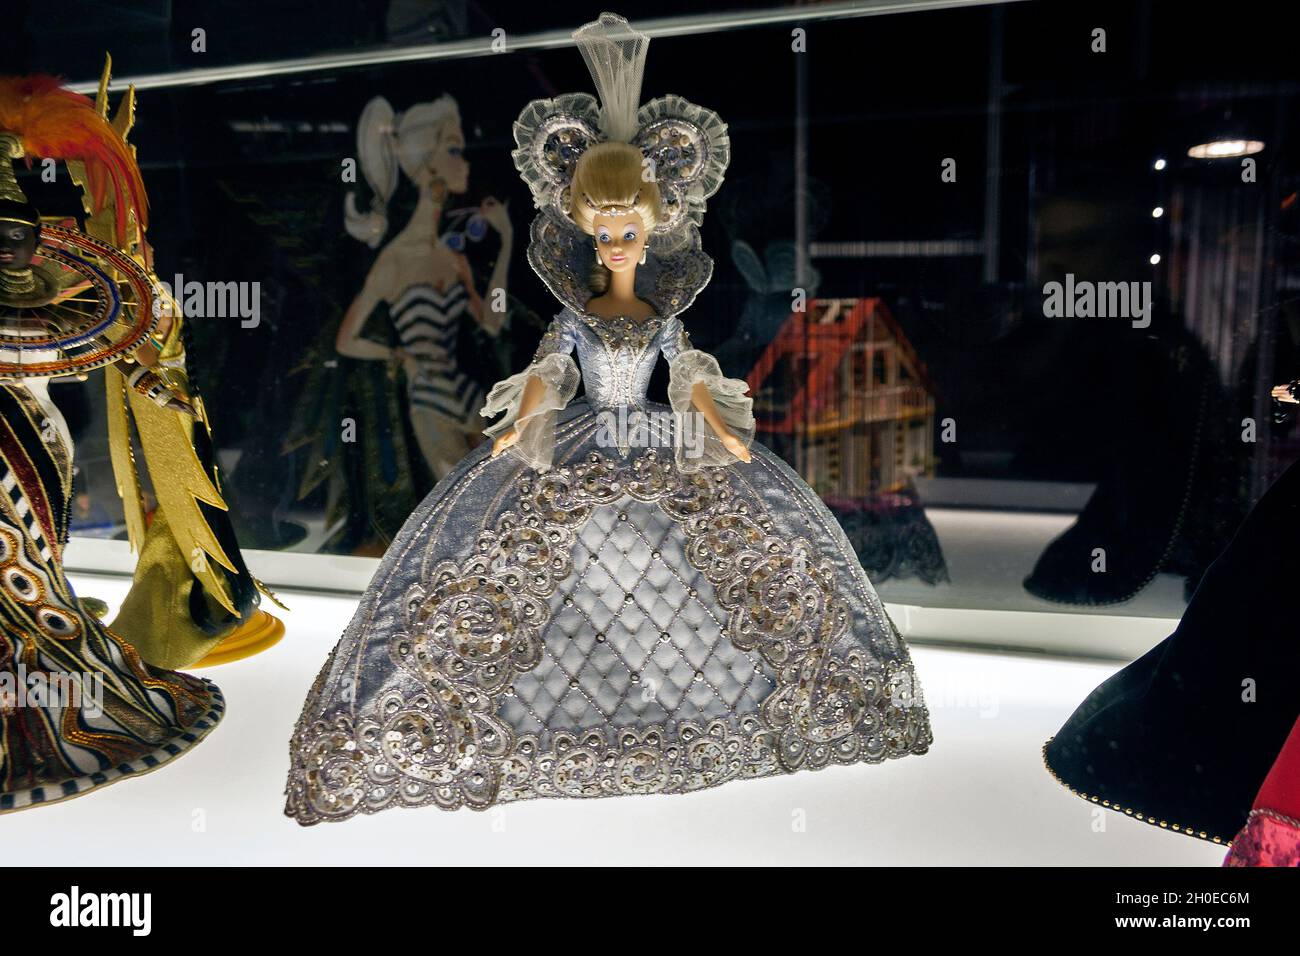 Madame du Barbie, Barbie The Icon exposition at Mudec museum in Milan, Italy Stock Photo